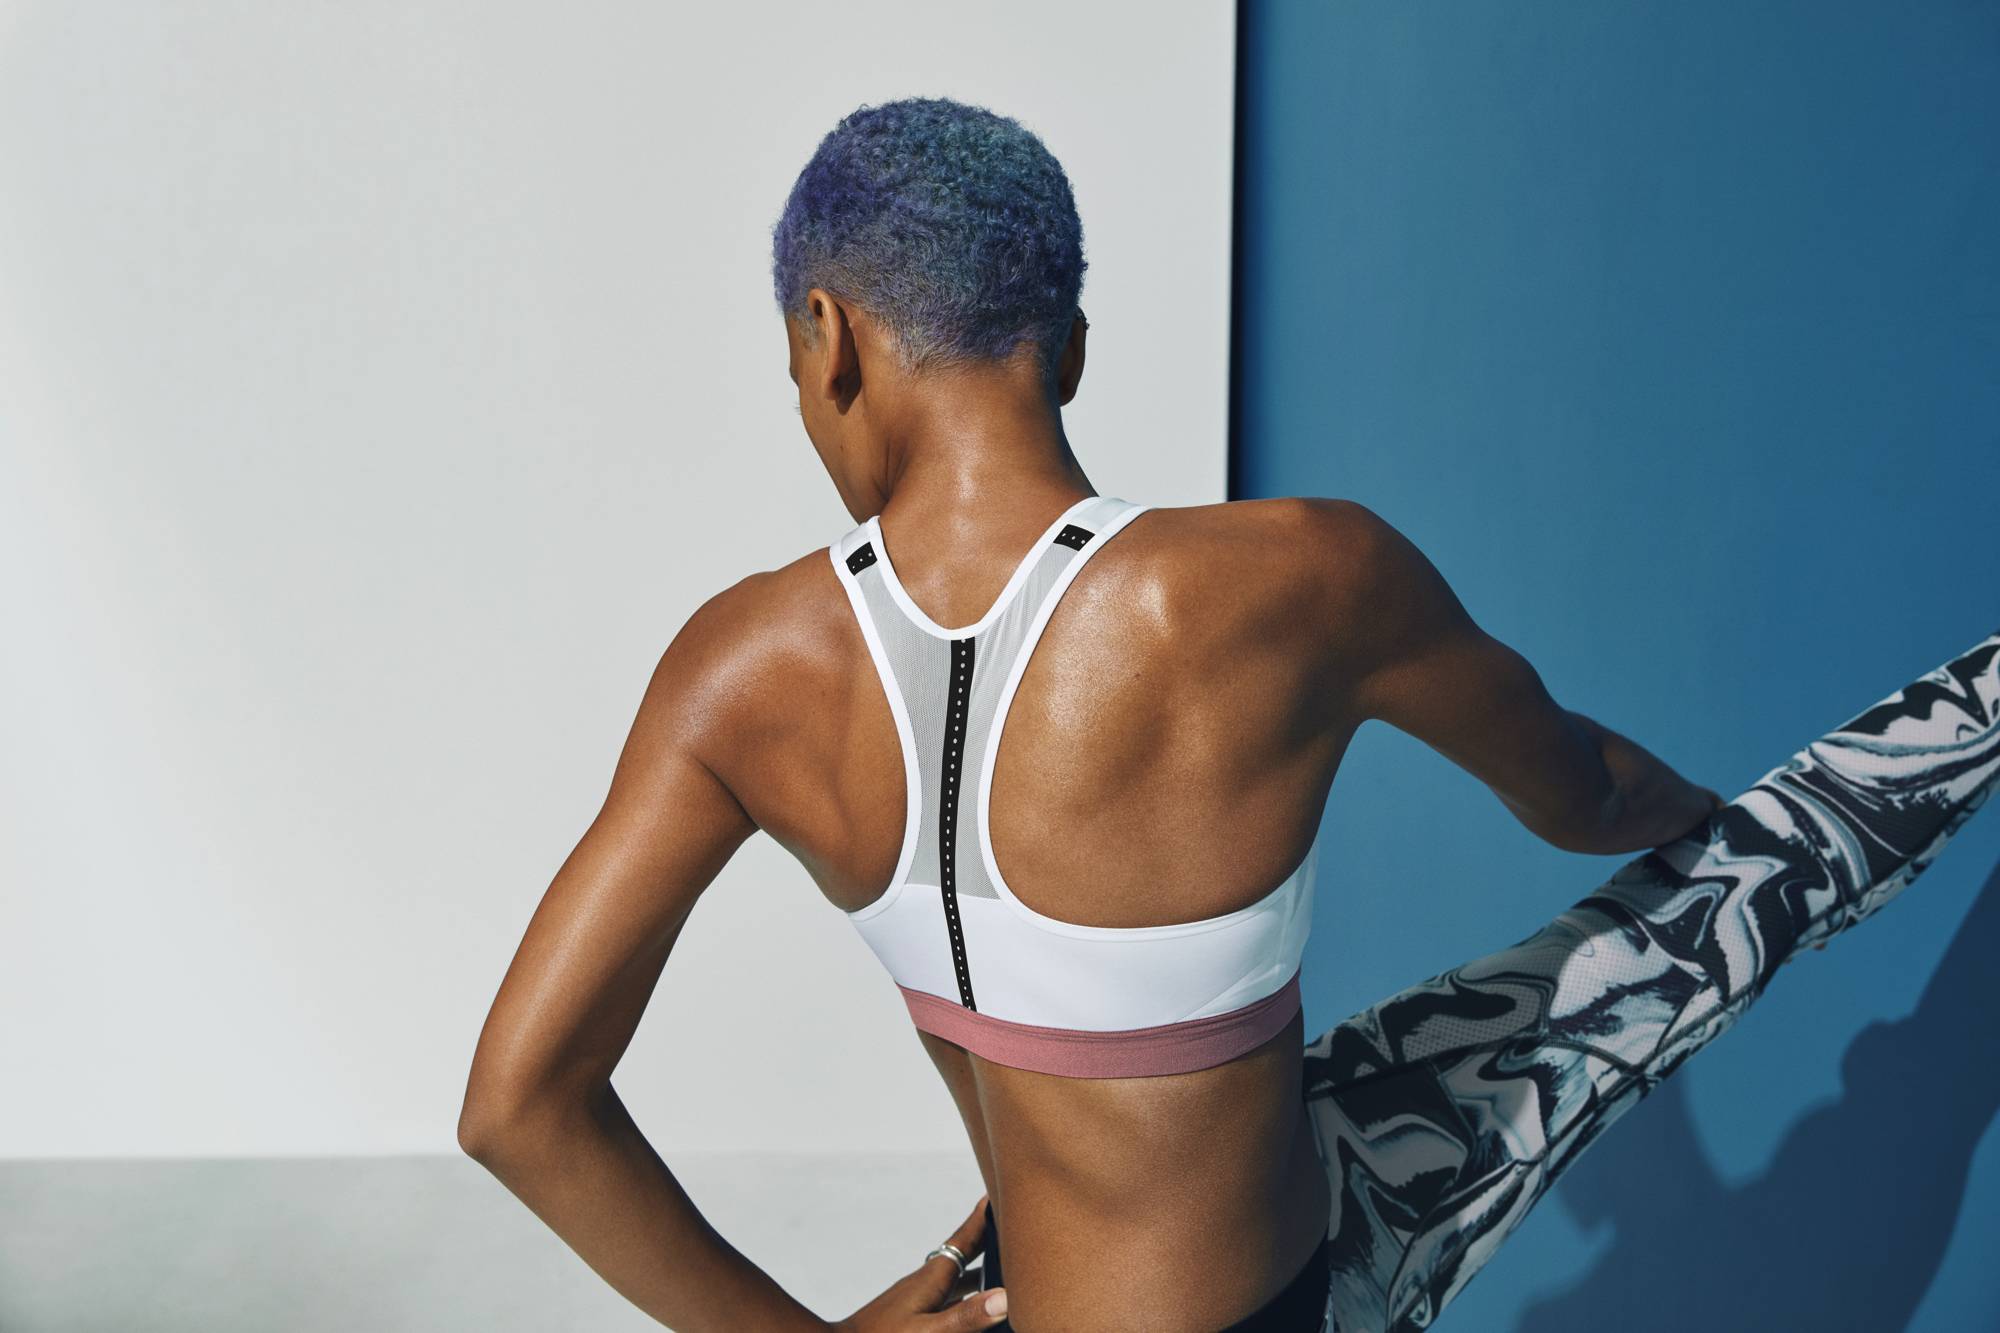 NIKE Spring 2018 Bra Collection Campaign